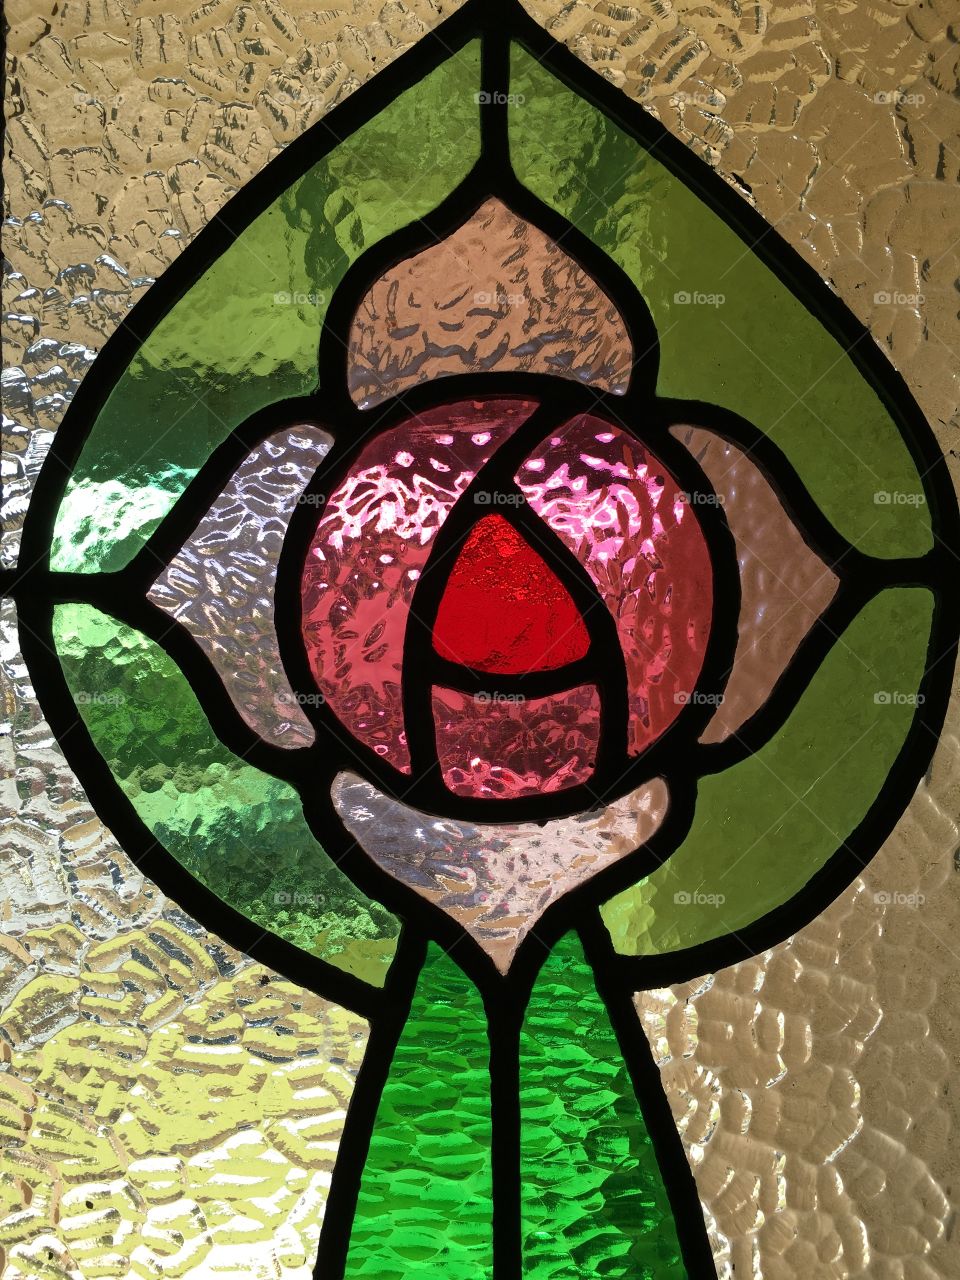 Stained glass window closeup background image circa 1930s